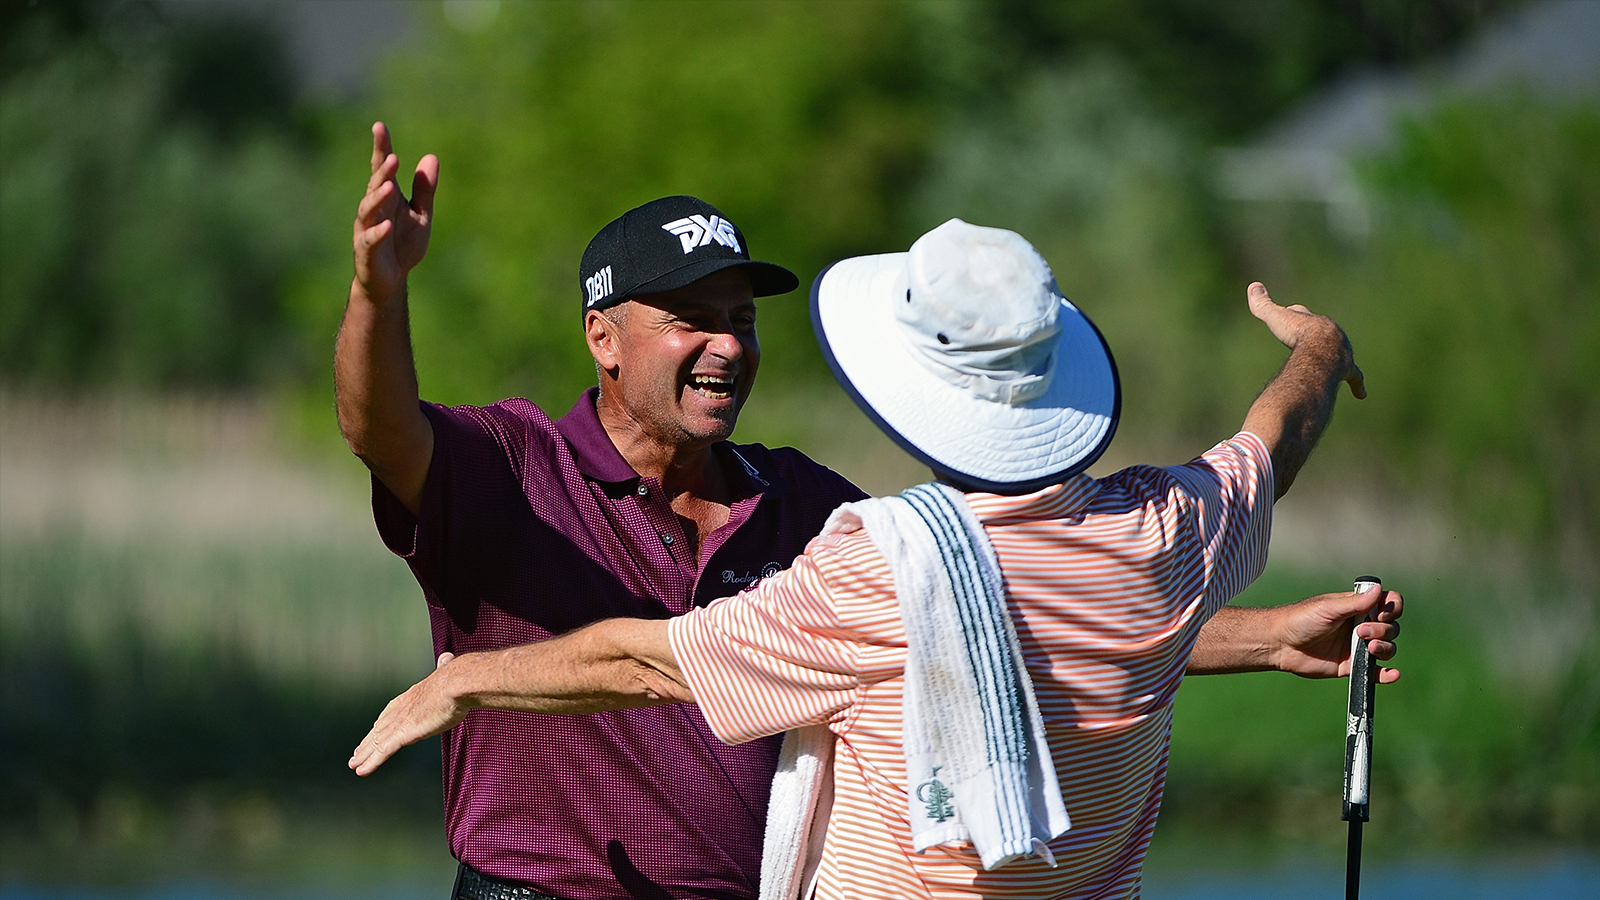 Watch Great Moments from the Senior PGA Championship on Golf Channel